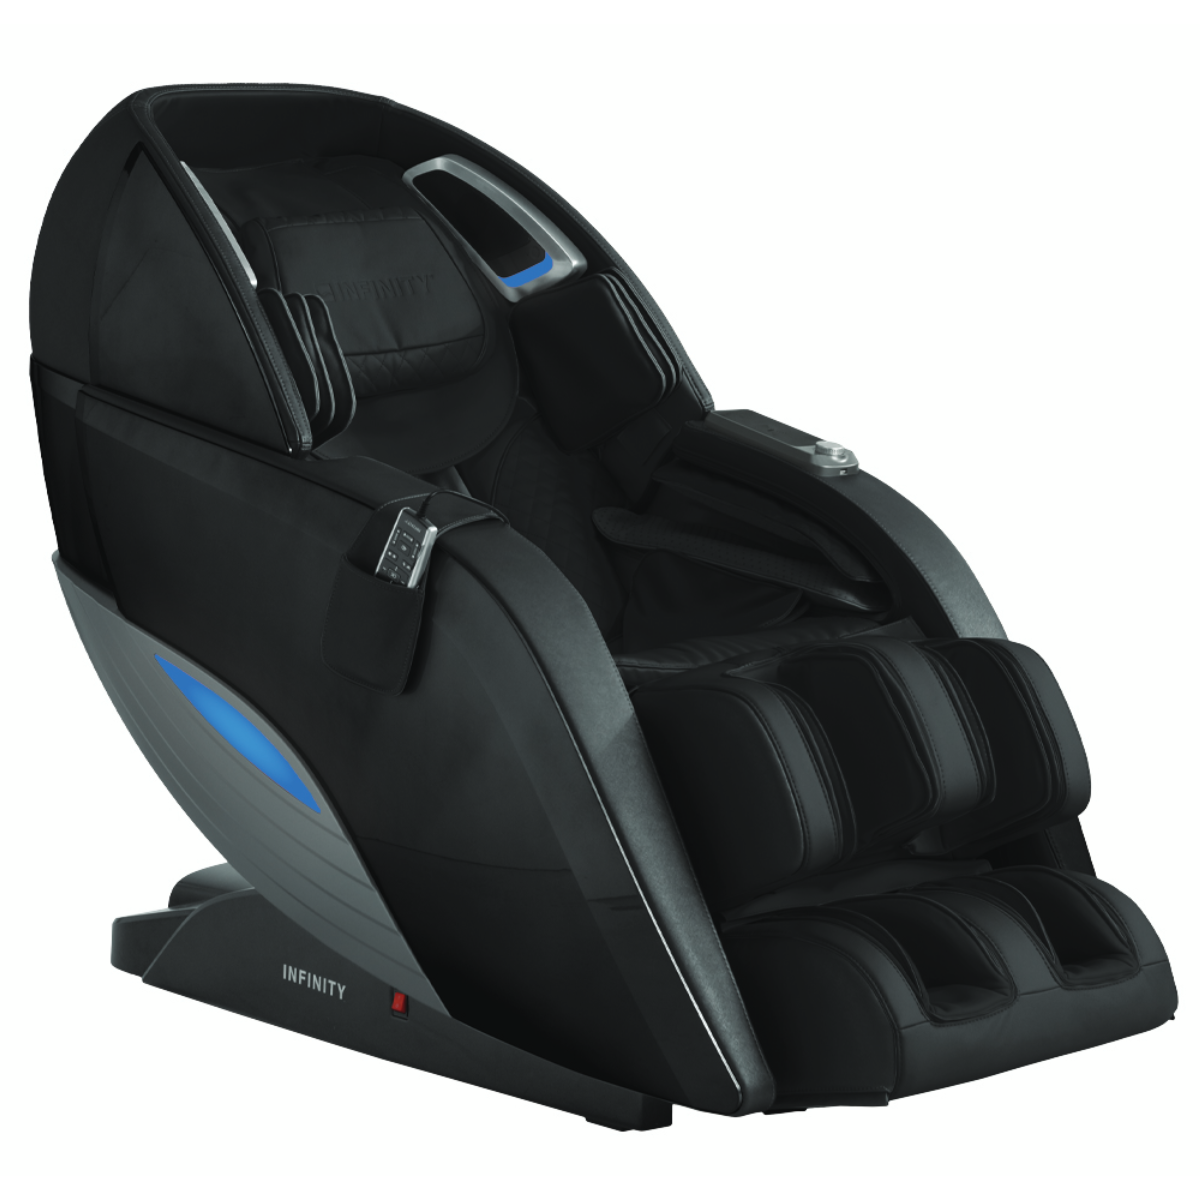 Infinity Dynasty 4D Massage Chair in Black - Home Bars USA